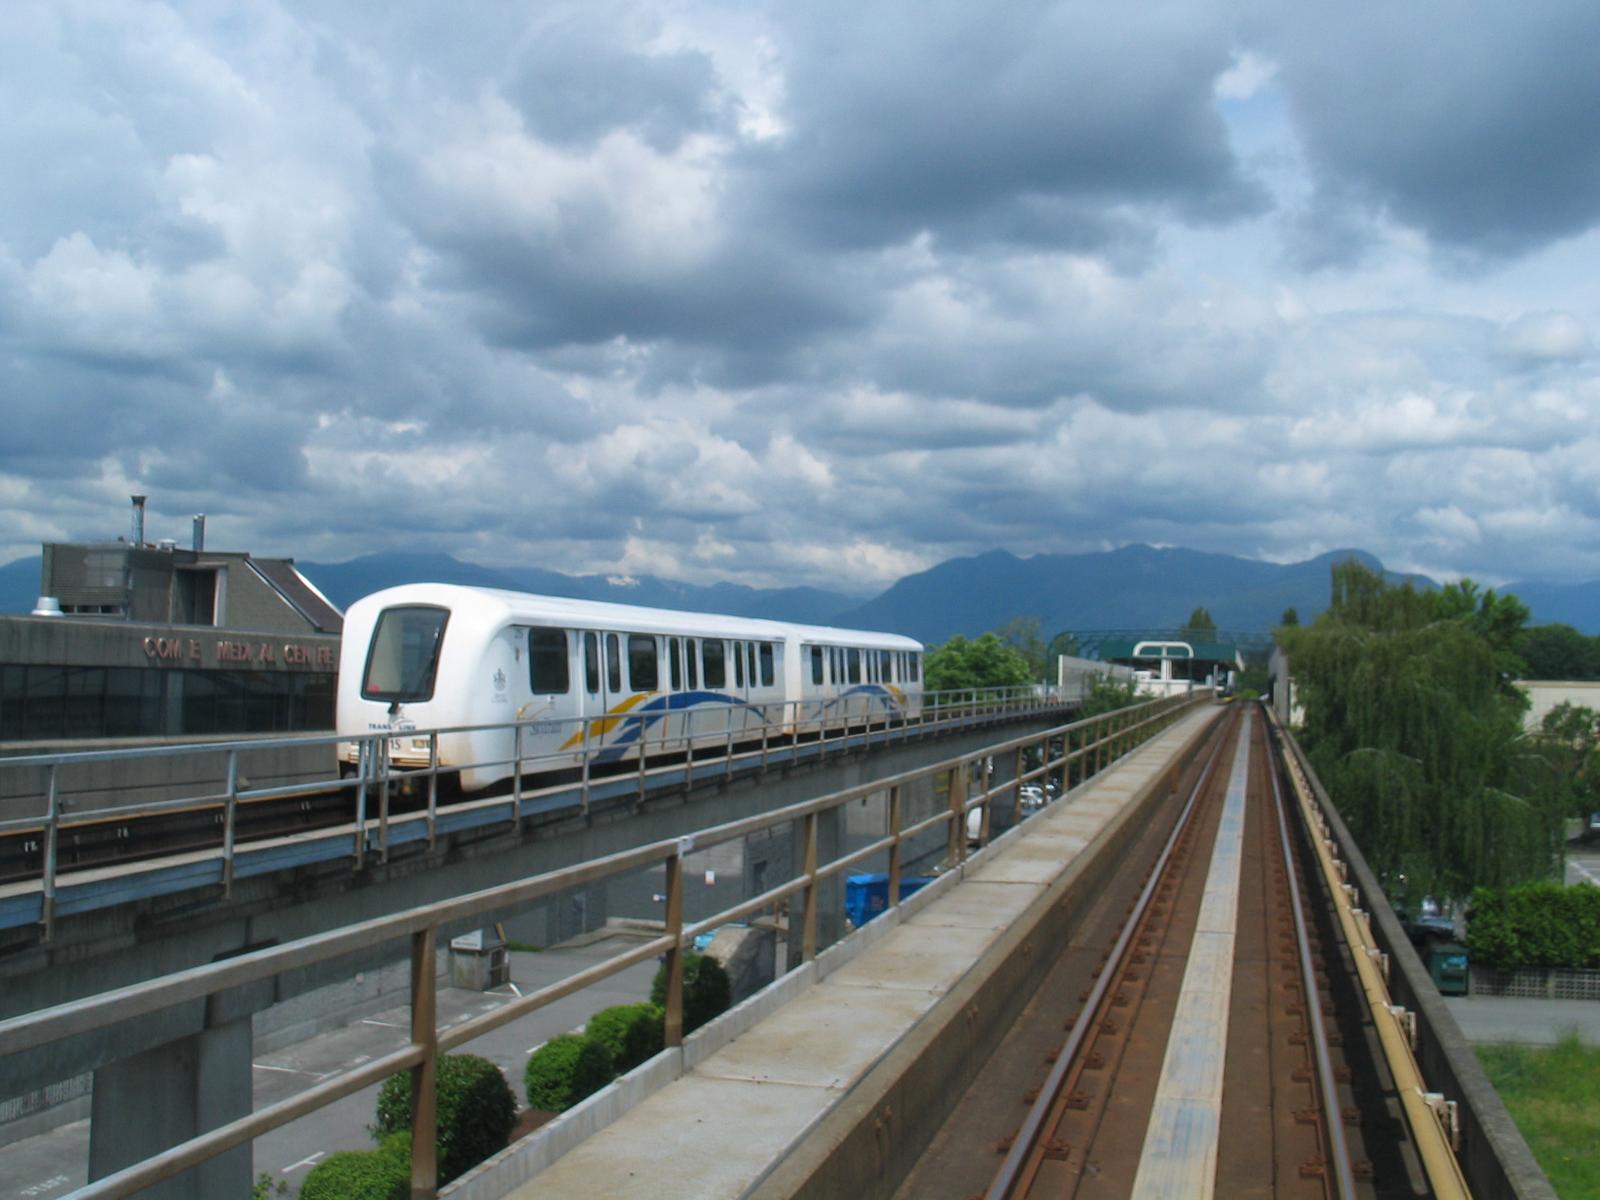 the view from the skytrain